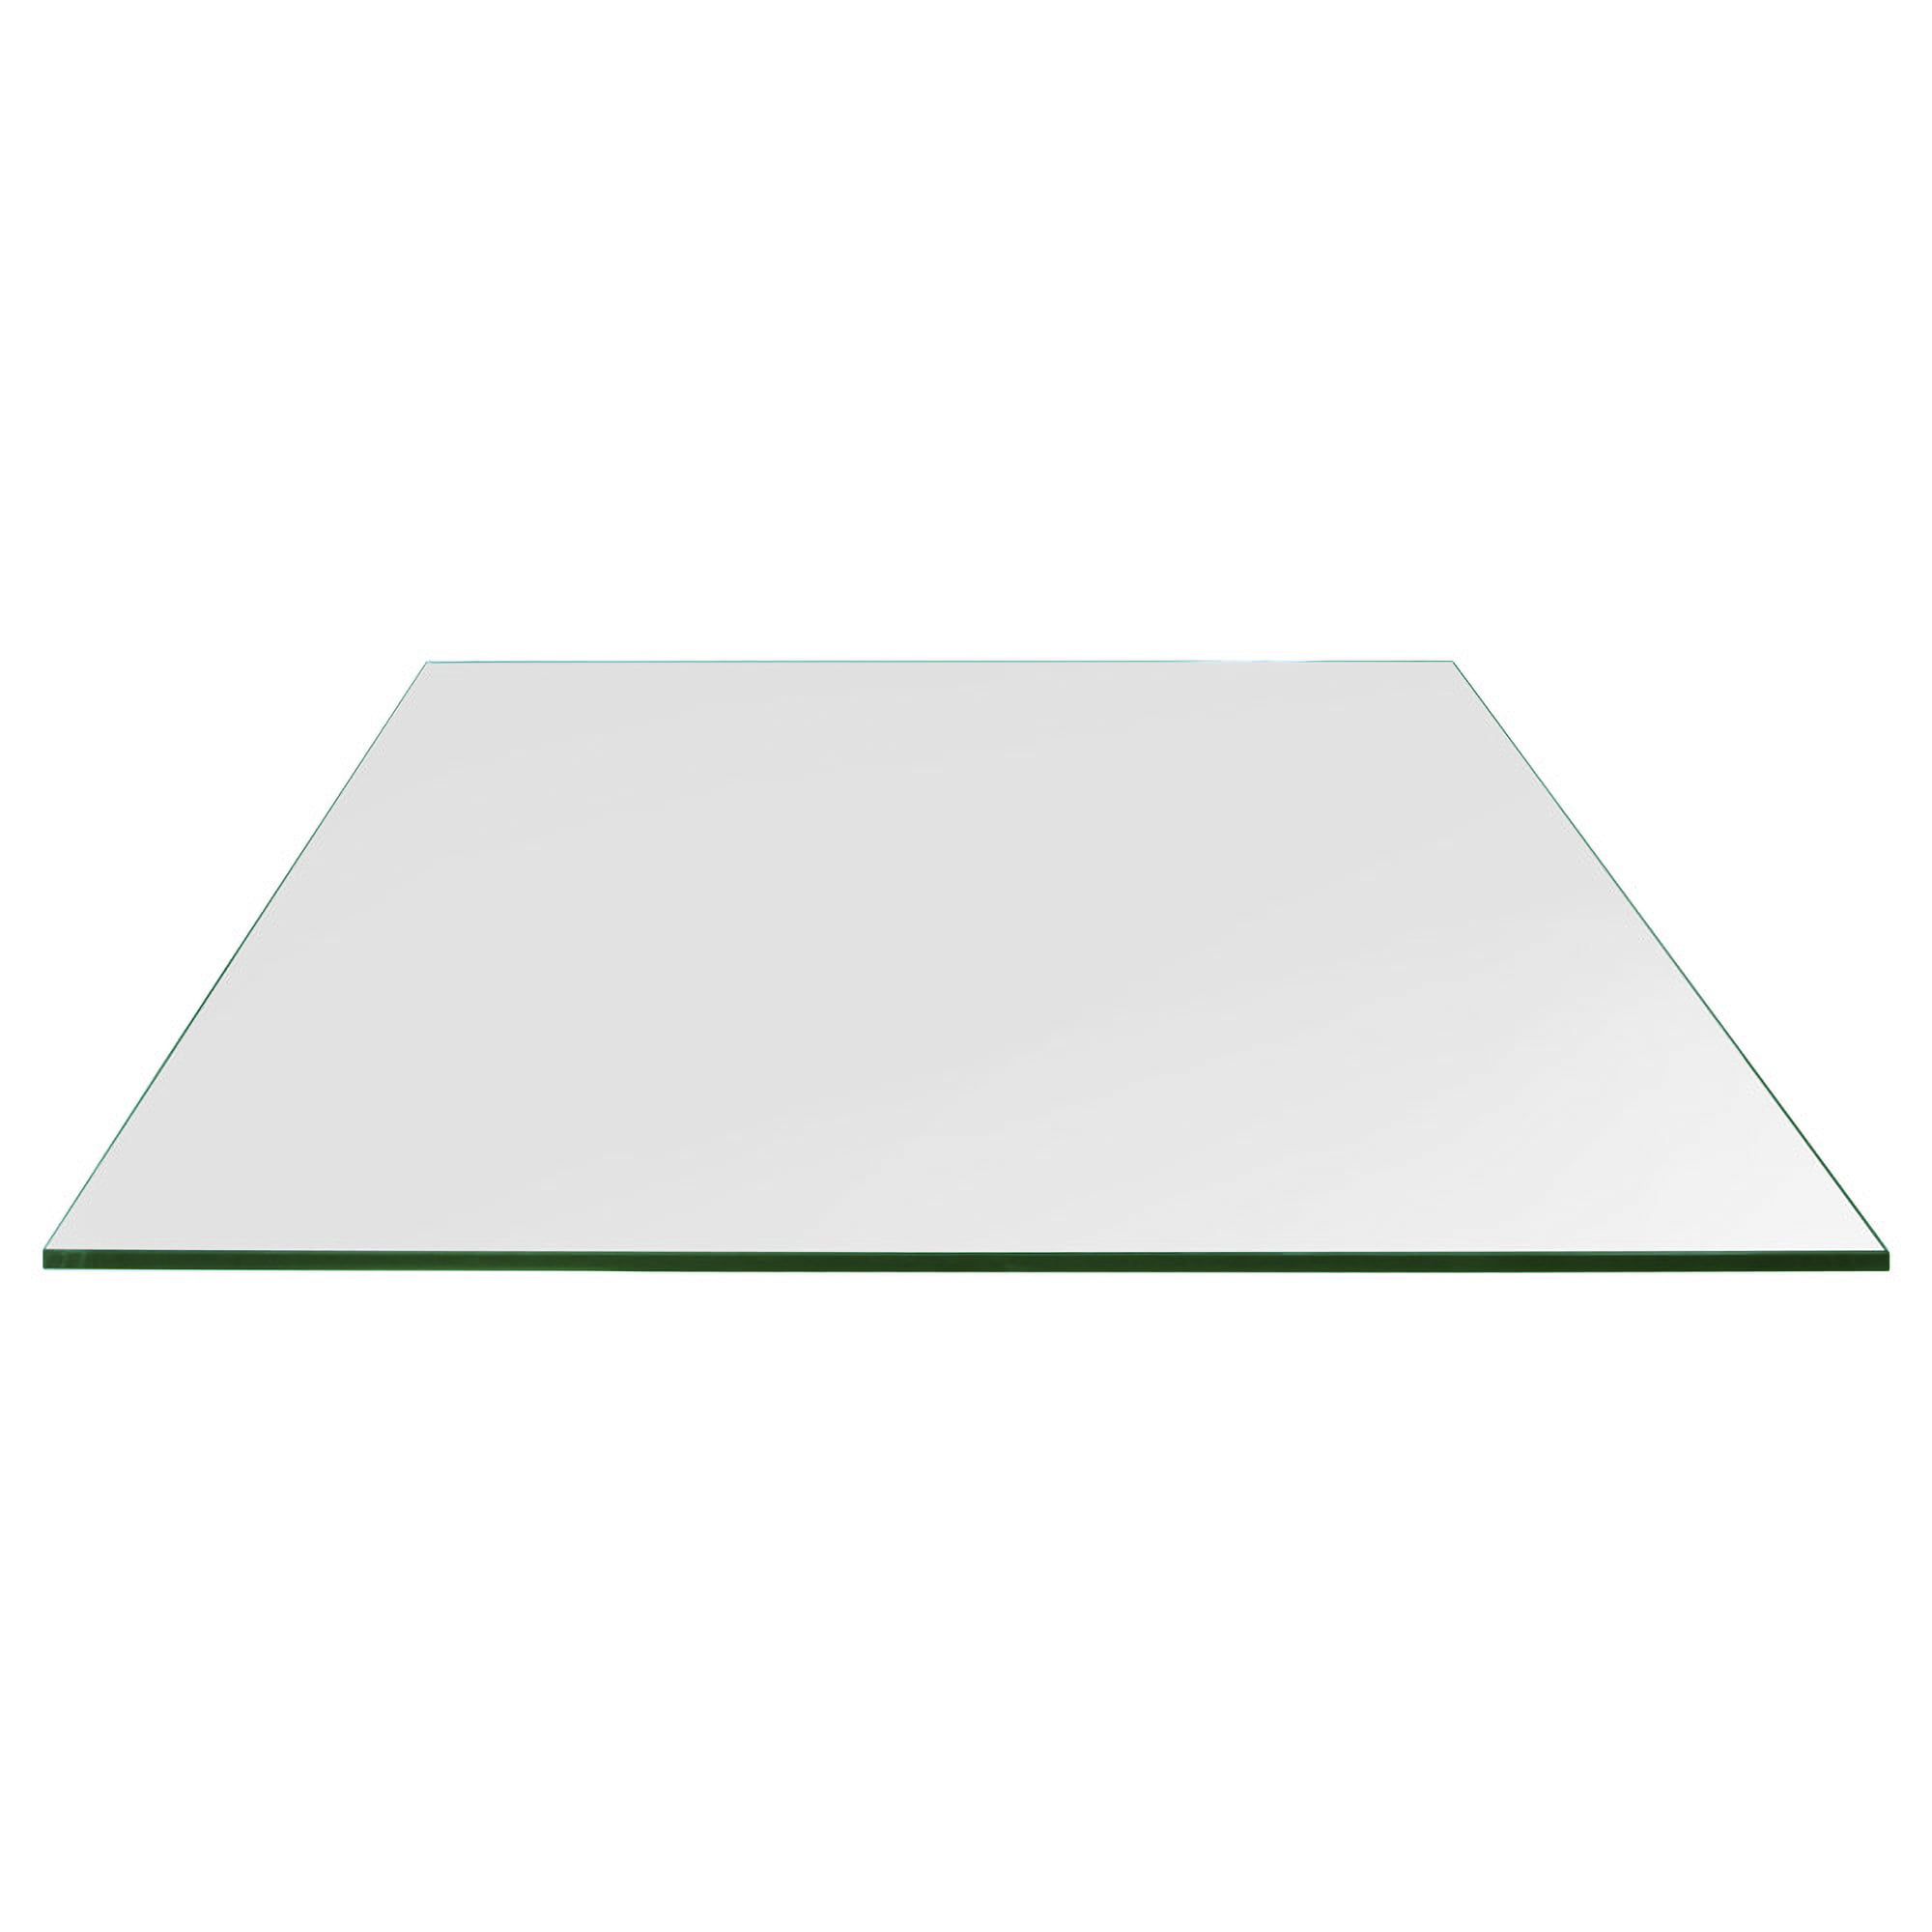 24 X 48 Rectangle Tempered Glass Table Top 1/2 Thick 1 Beveled Edge